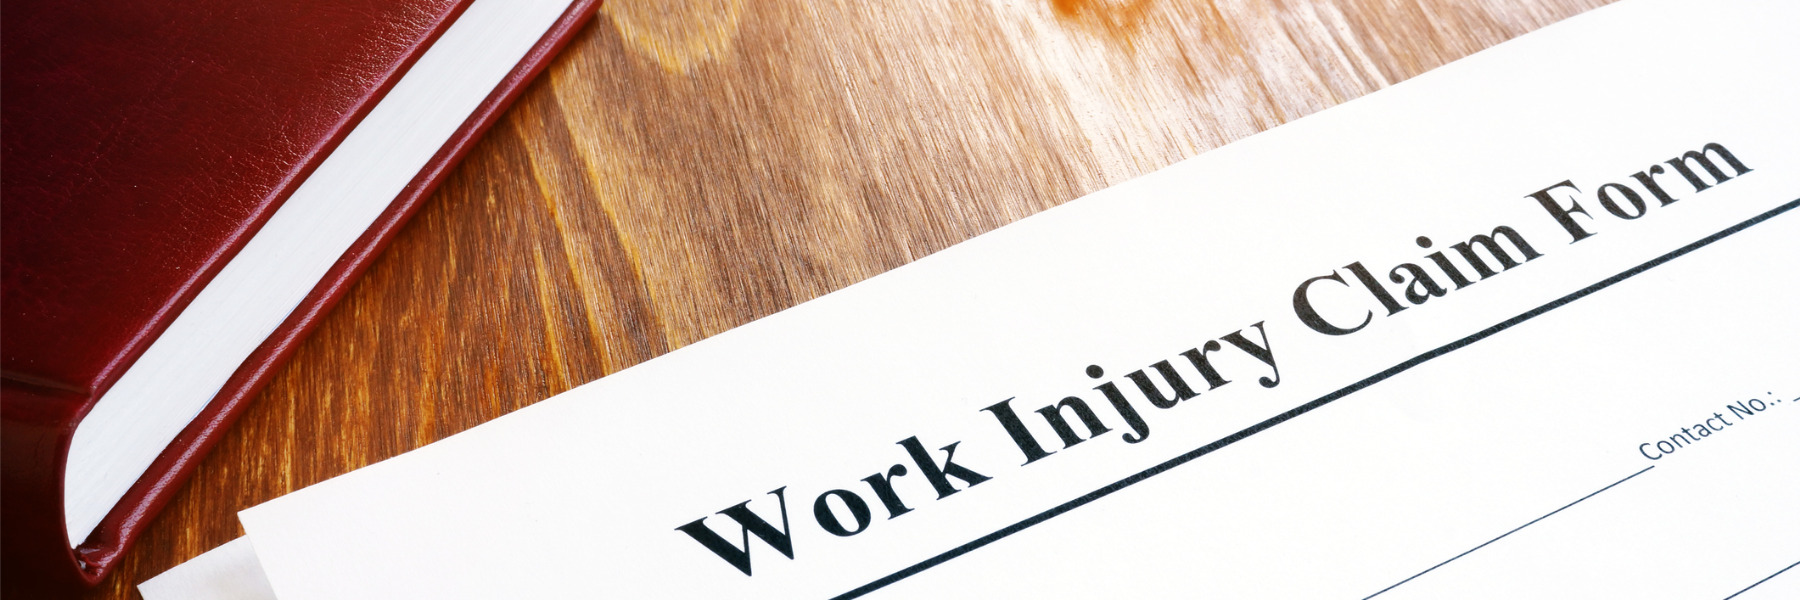 picture of work injury claim form